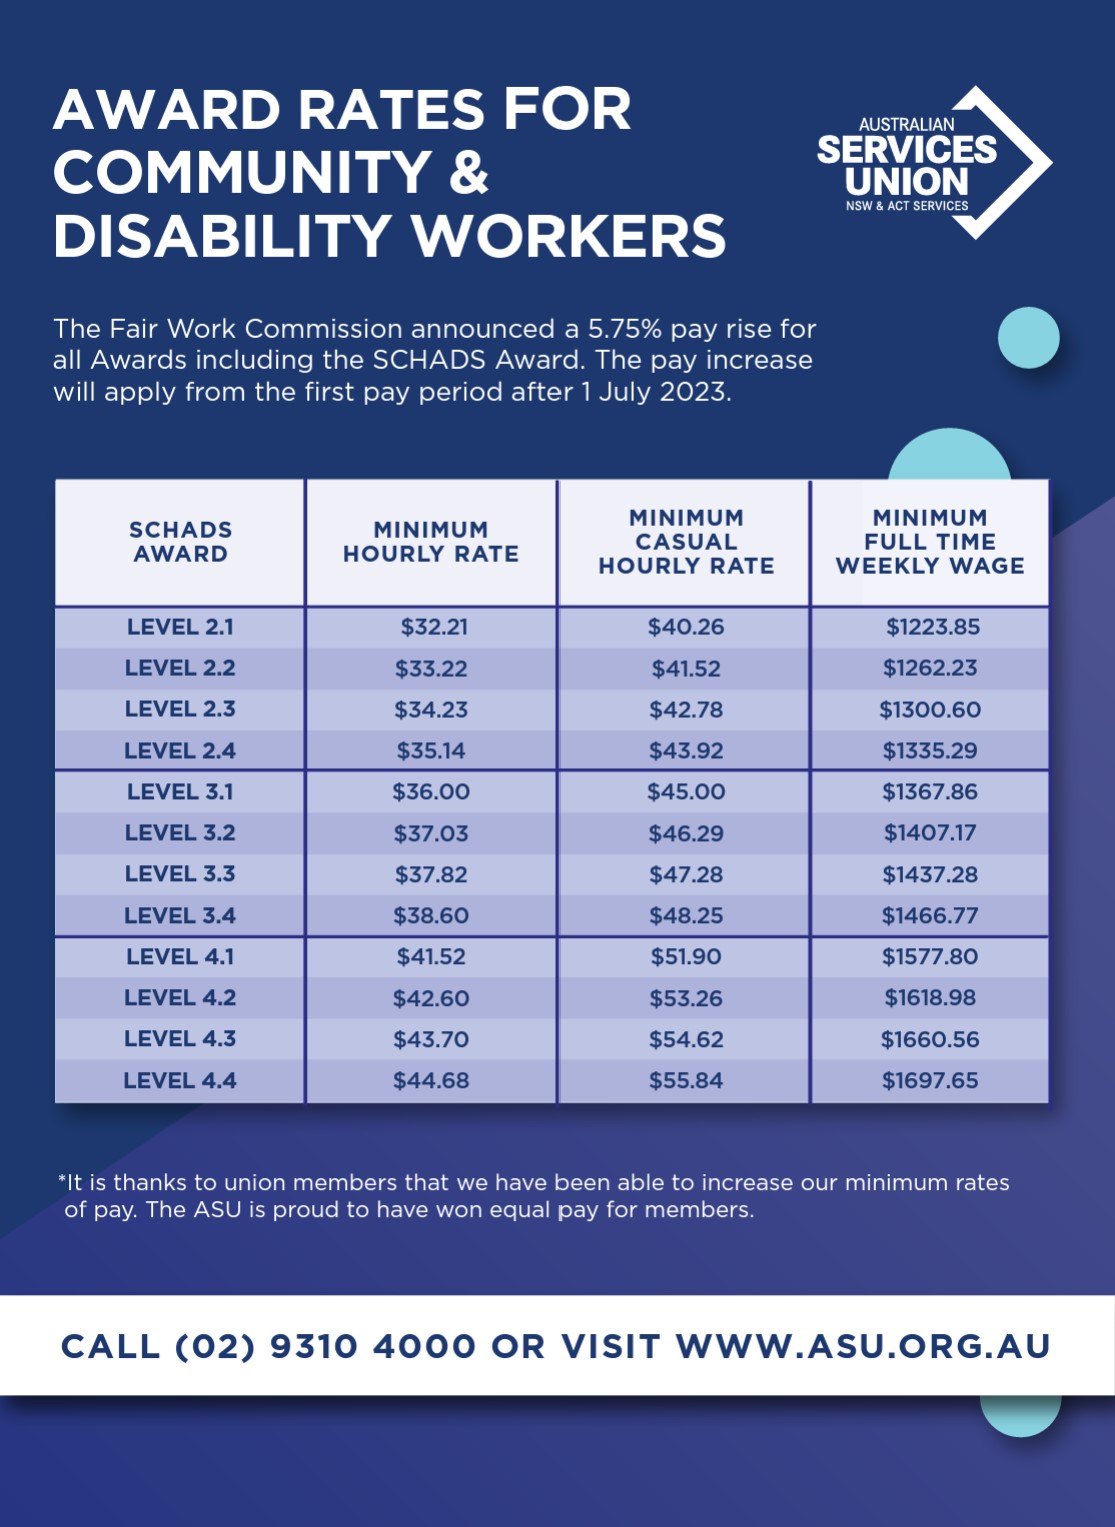 Your New 2023 Pay Rates New Tab